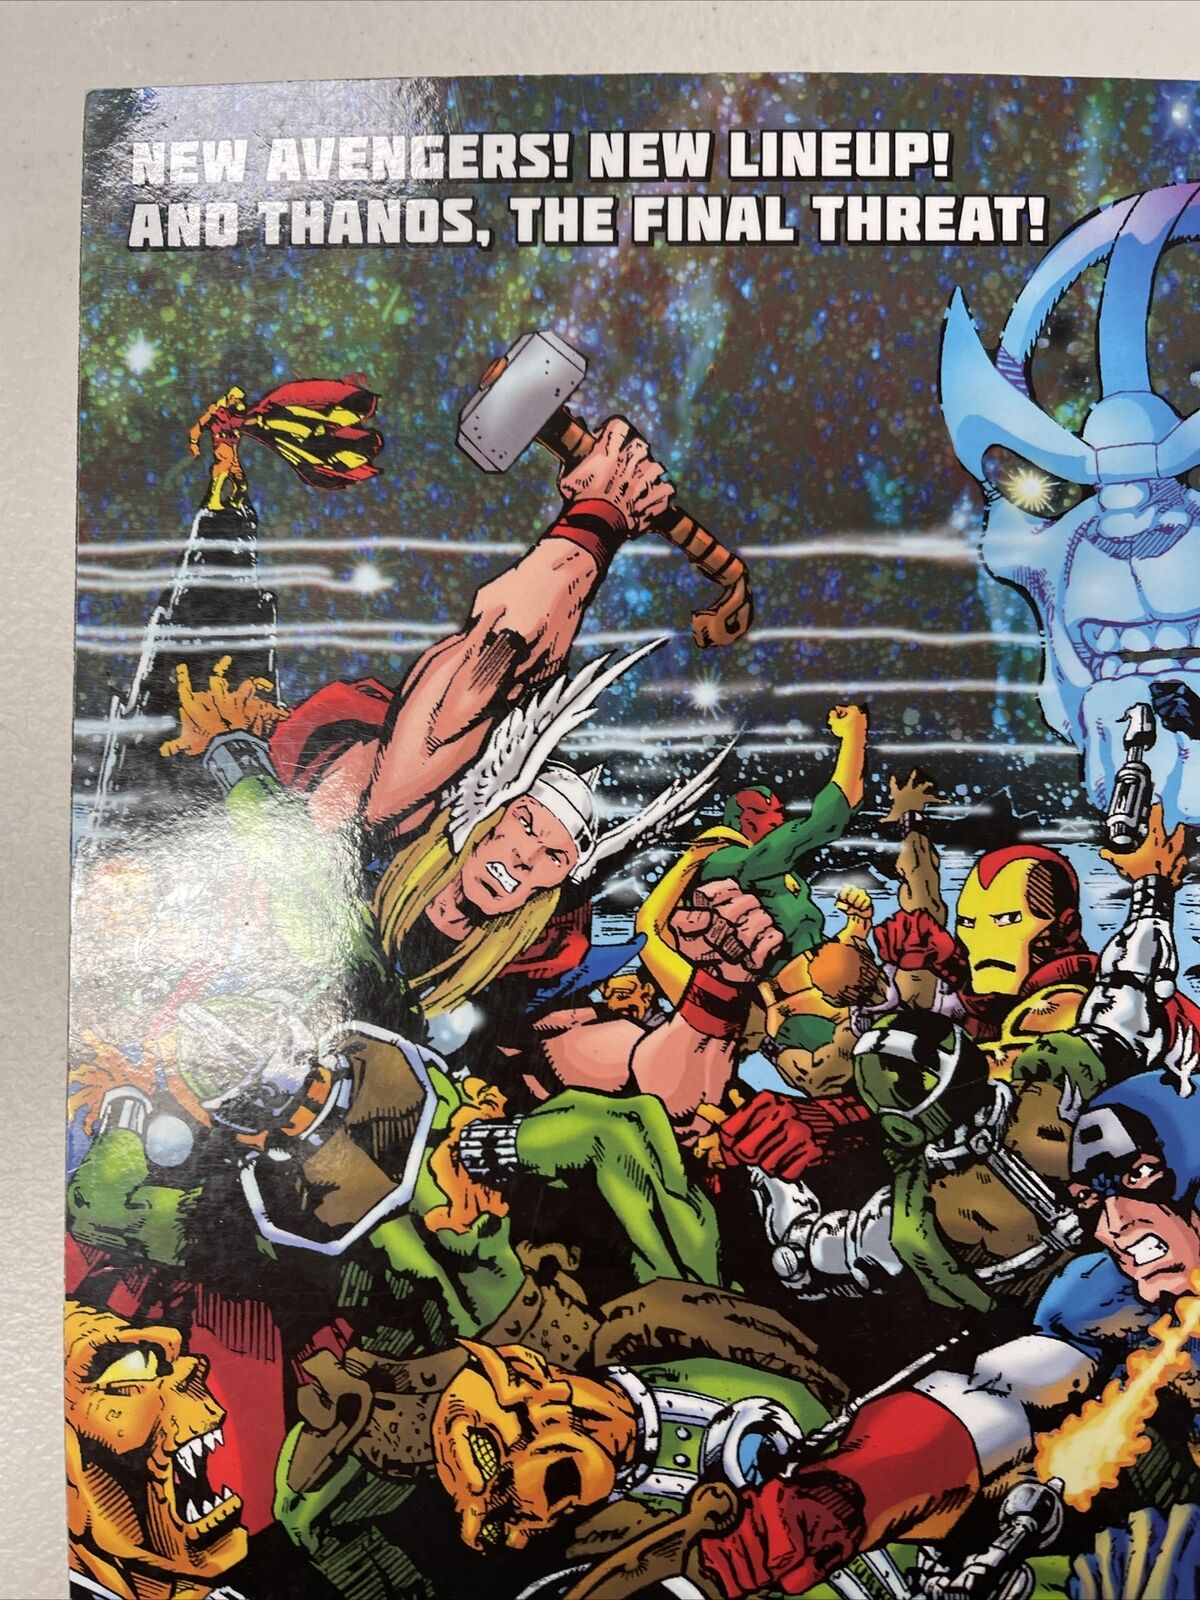 The Avengers The Final Threat TPB Epic Collection Marvel Comics Great Shape OOP